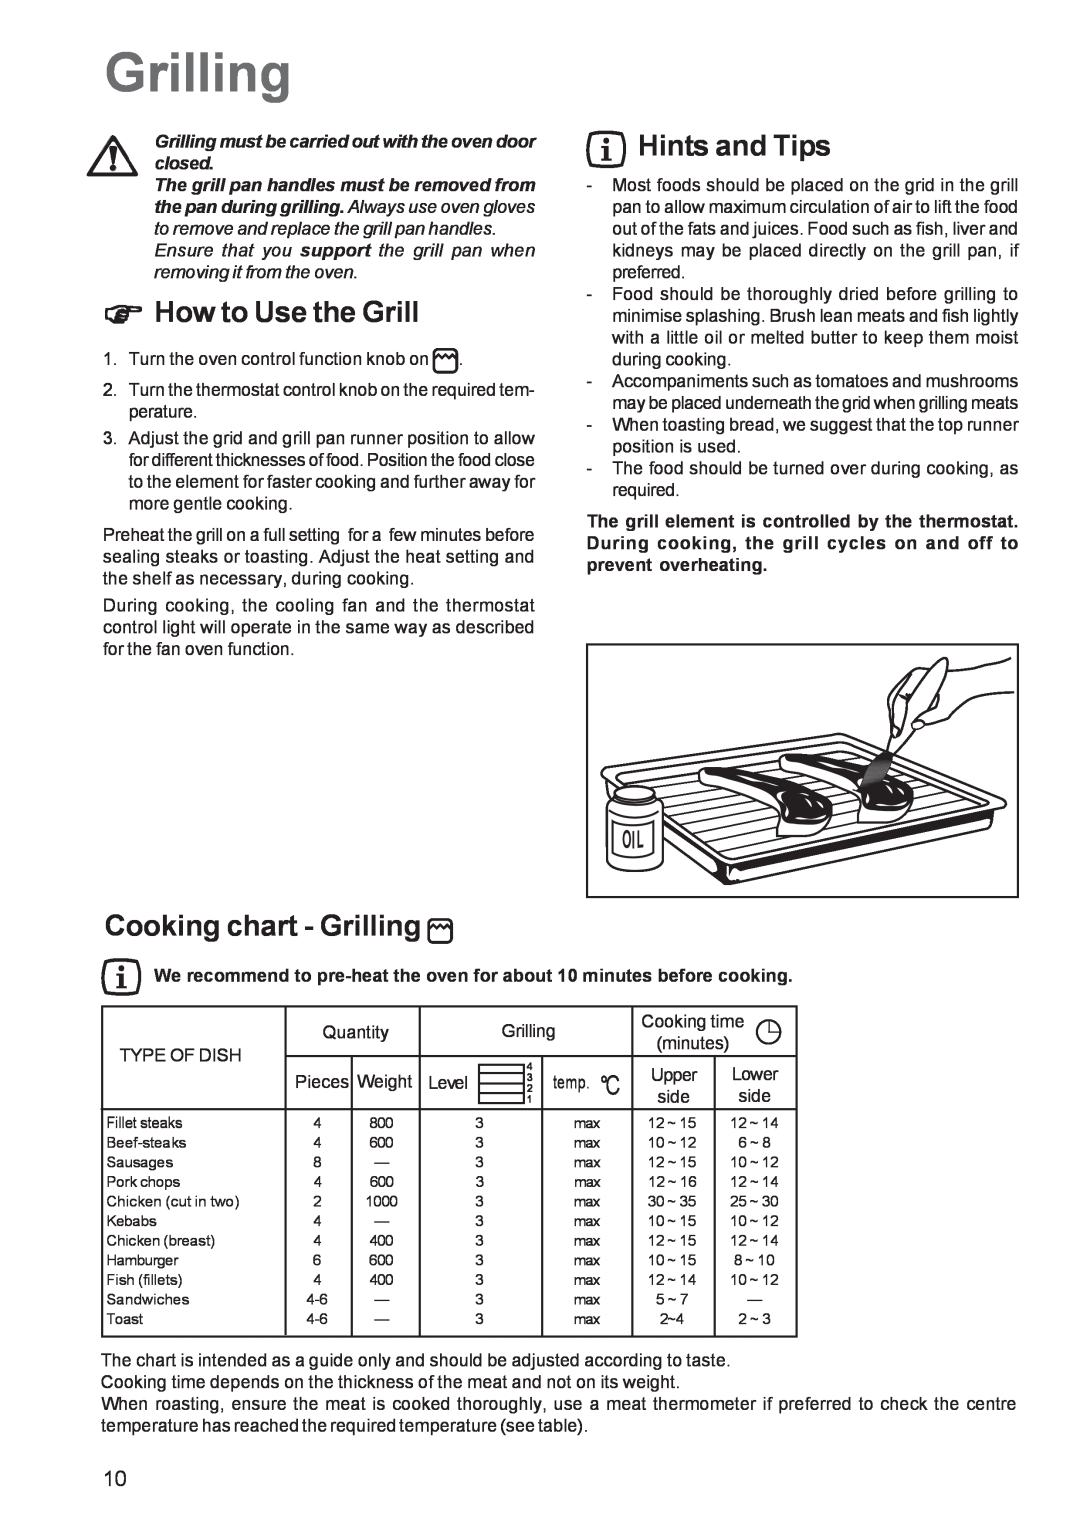 Zanussi ZBF 260 manual How to Use the Grill, Cooking chart - Grilling, Hints and Tips 